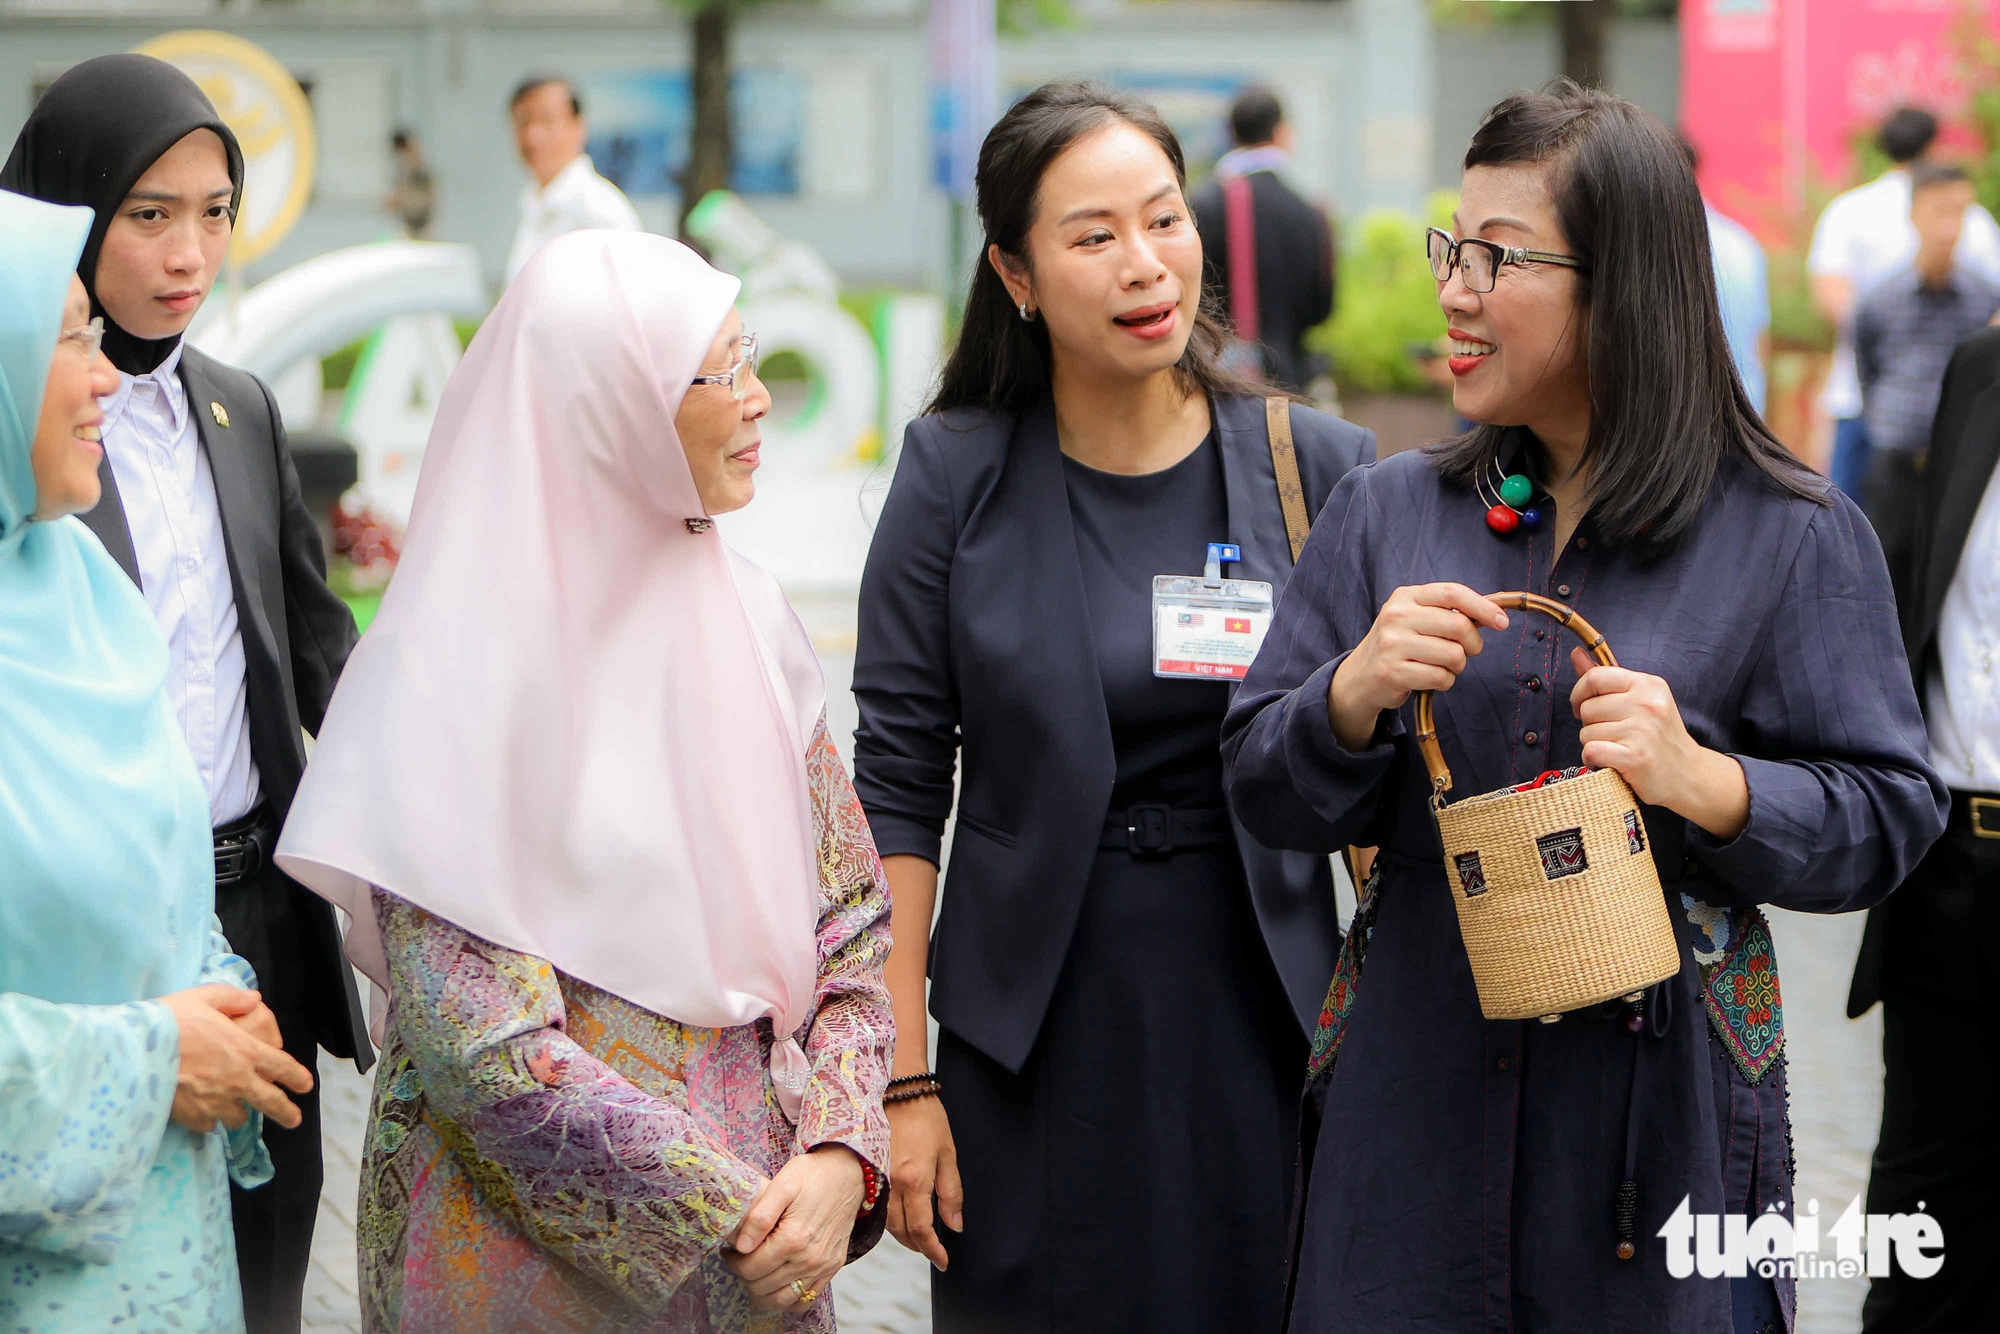 Vietnamese Prime Minister Pham Minh Chinh’s spouse Le Thi Bich Tran is seen briefing Malaysian Prime Minister Anwar Ibrahim’s spouse Dato' Seri Dr. Wan Azizah Binti Wan Ismail on a bag made of water hyacinth, bamboo, and Vietnamese brocade. Photo: Nguyen Khanh / Tuoi Tre